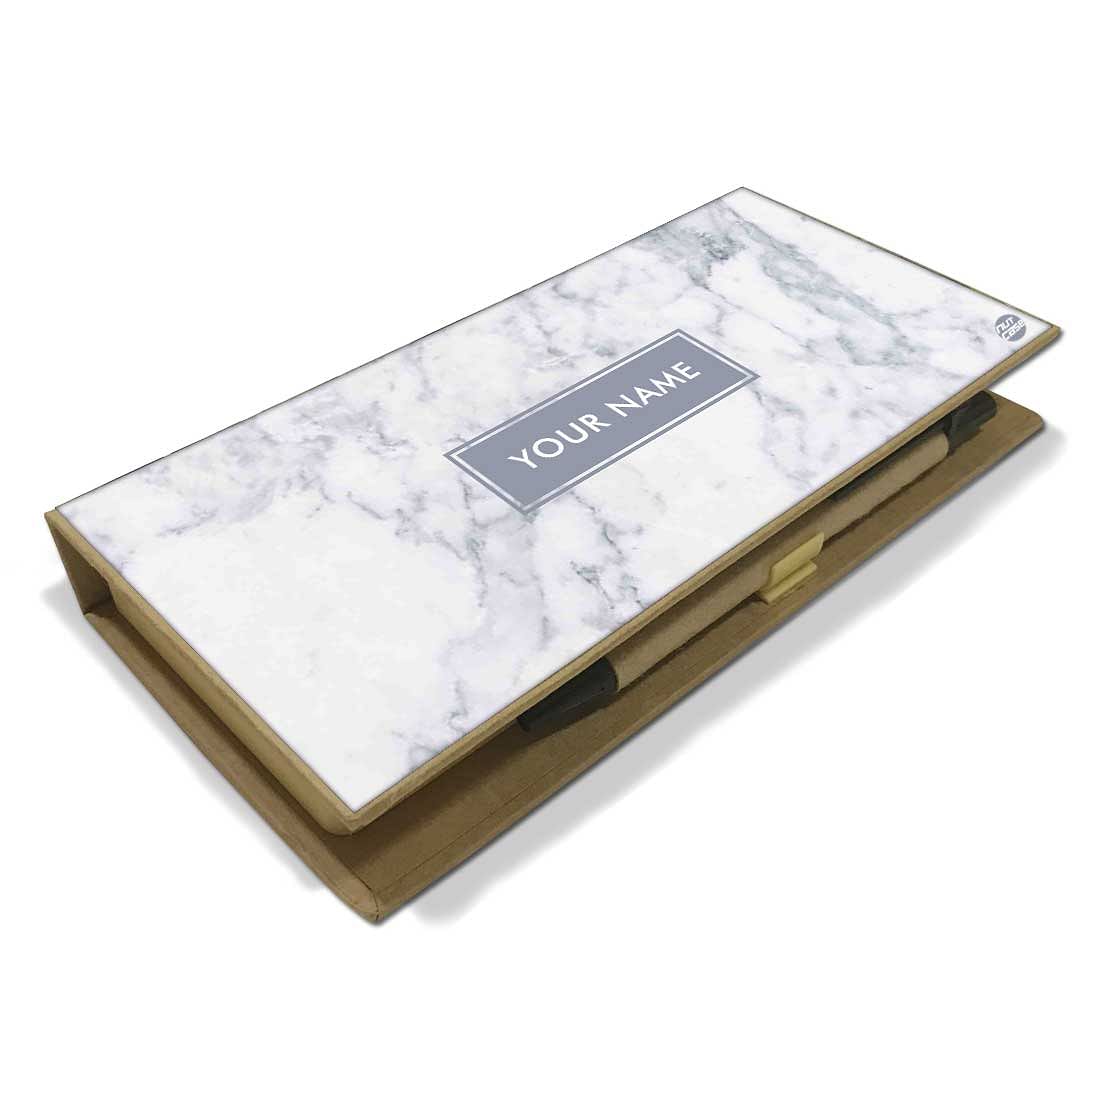 Customized Stationery for Office Desk Organizer - Marble White Nutcase